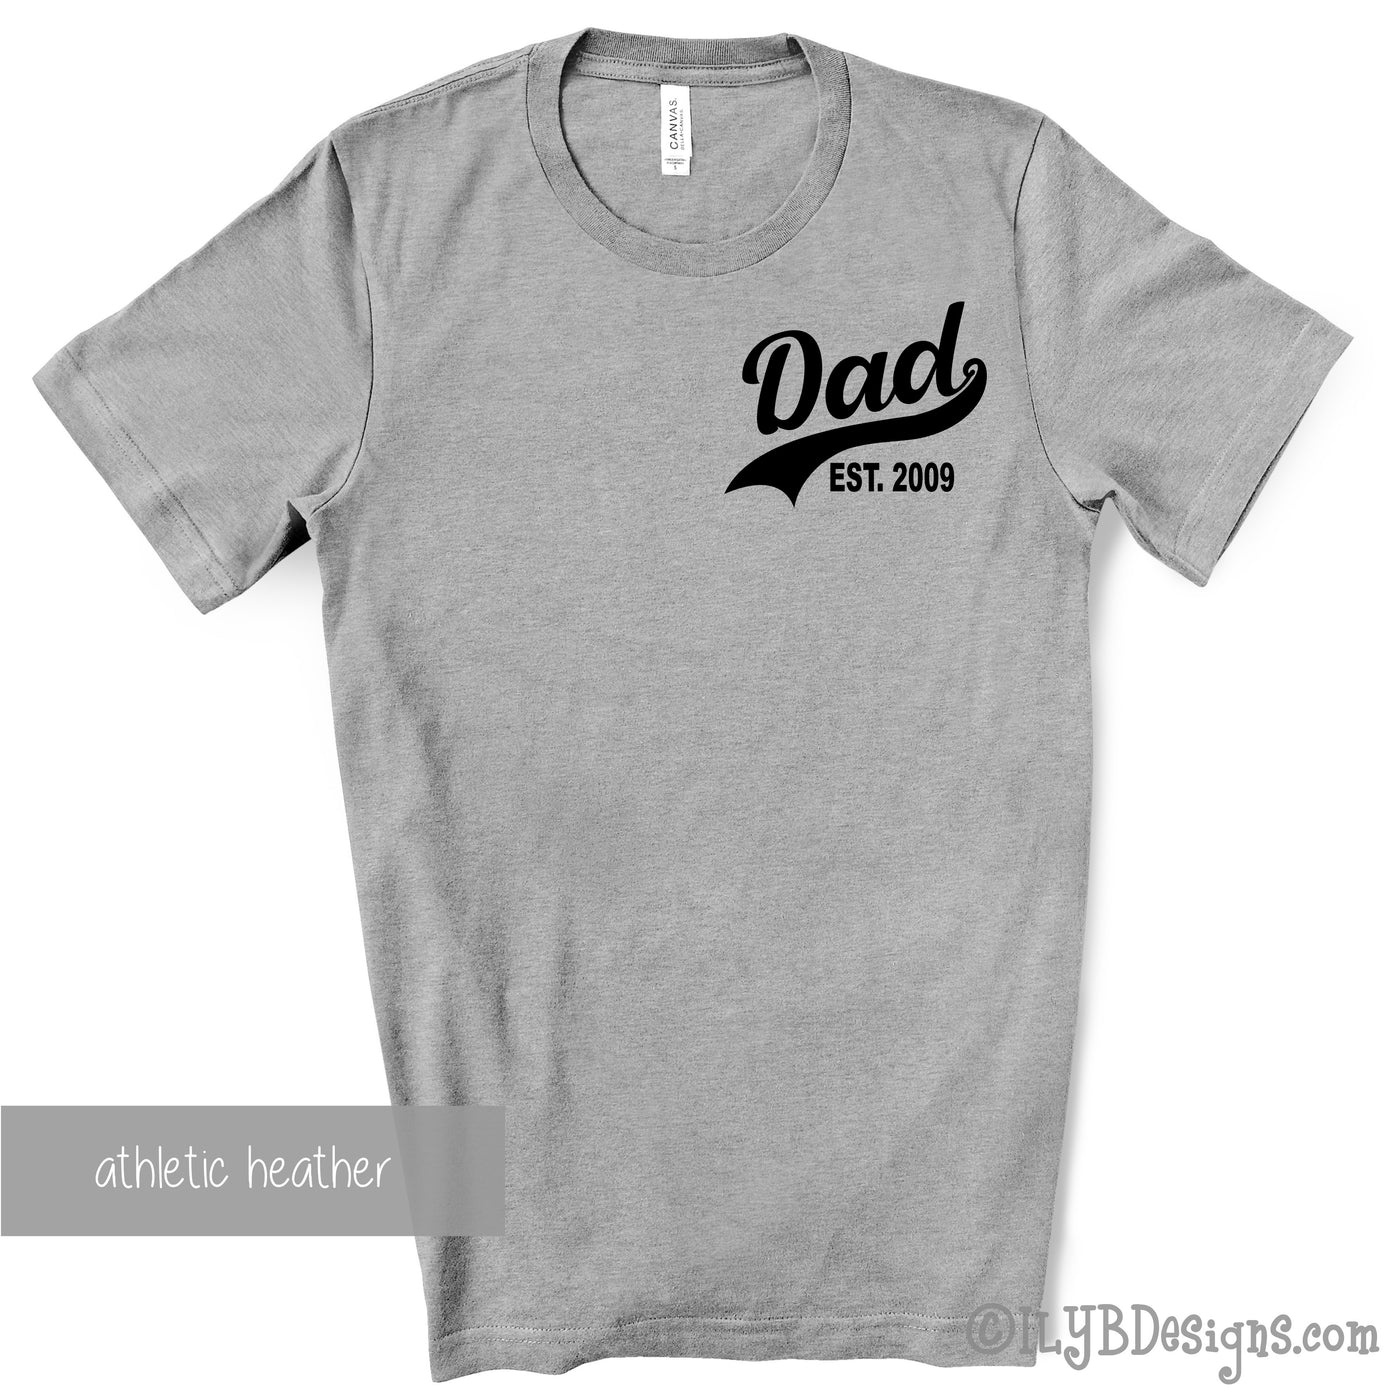 Dad Established Shirt Personalized - Father's Day Shirt - Father's Day Gift - Dad Gift - ILYB Designs